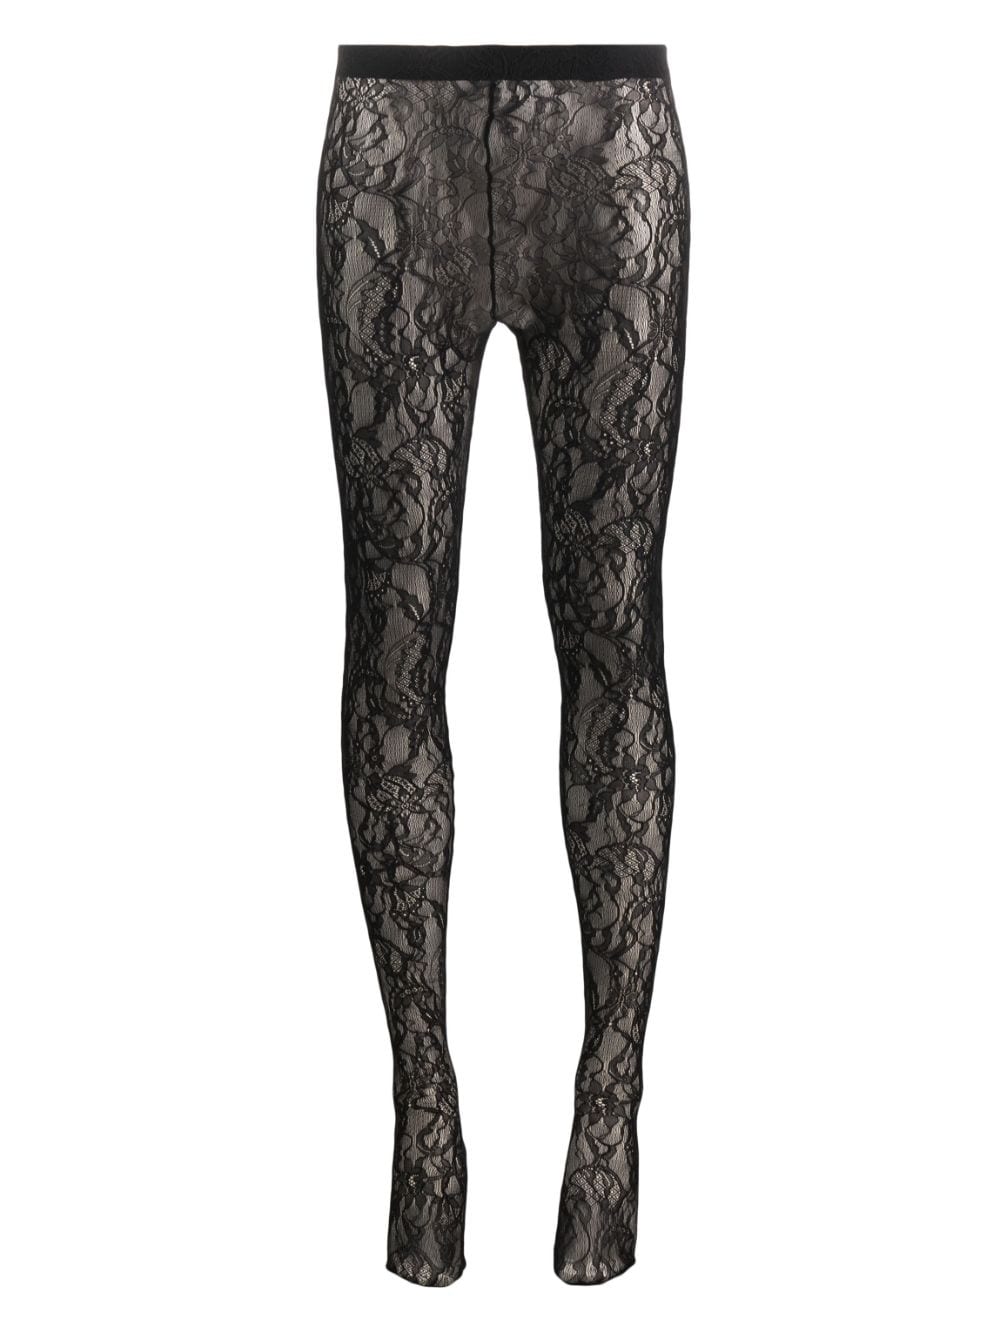 GUCCI Leg Rombhoid Woven Lace Footless Tights Black NEW Size S